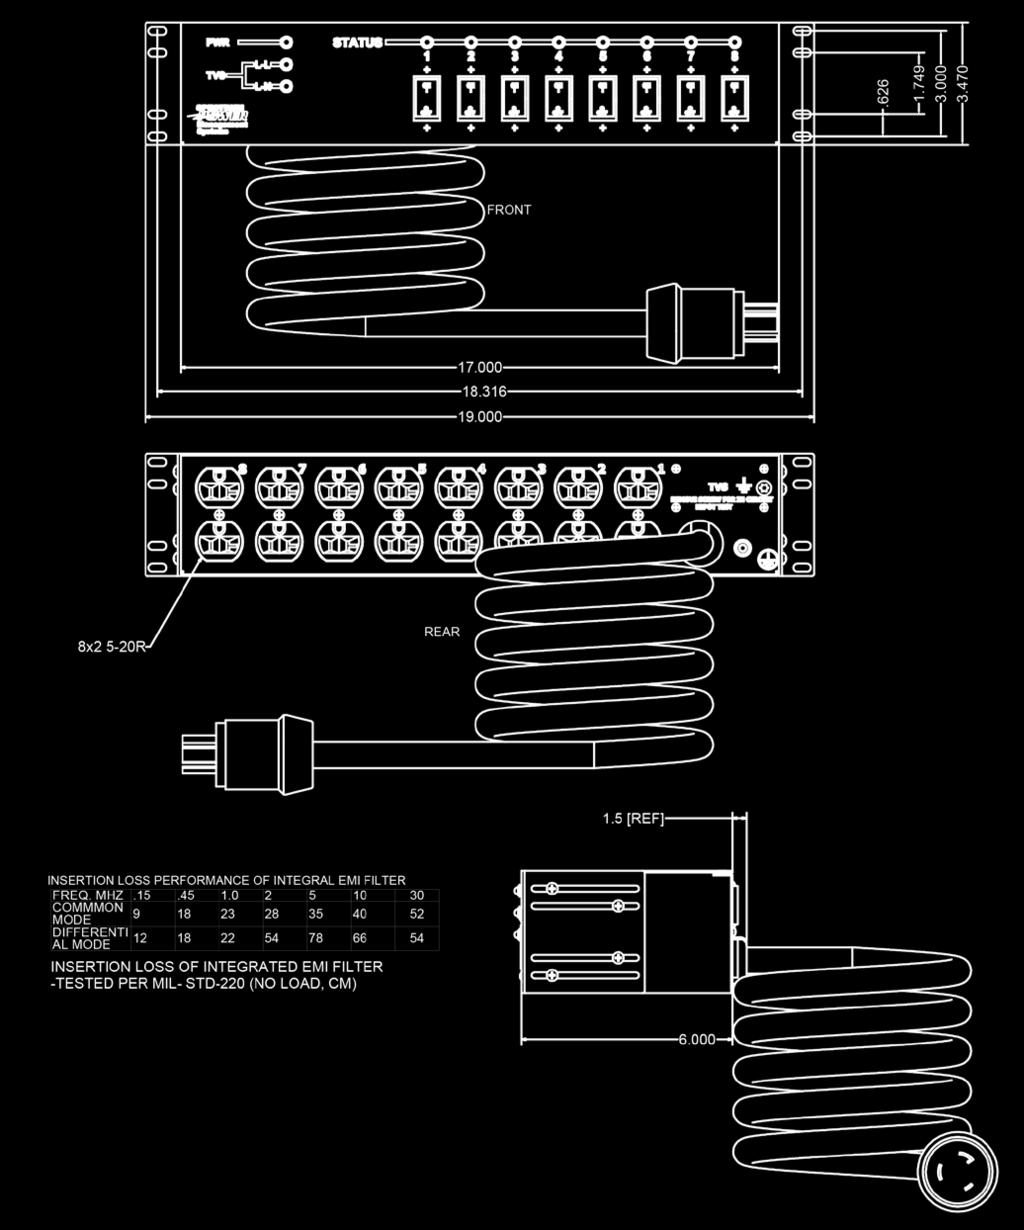 Applications Data Centers Network operations centers Basic Power Strips, 7200-A-39-3: